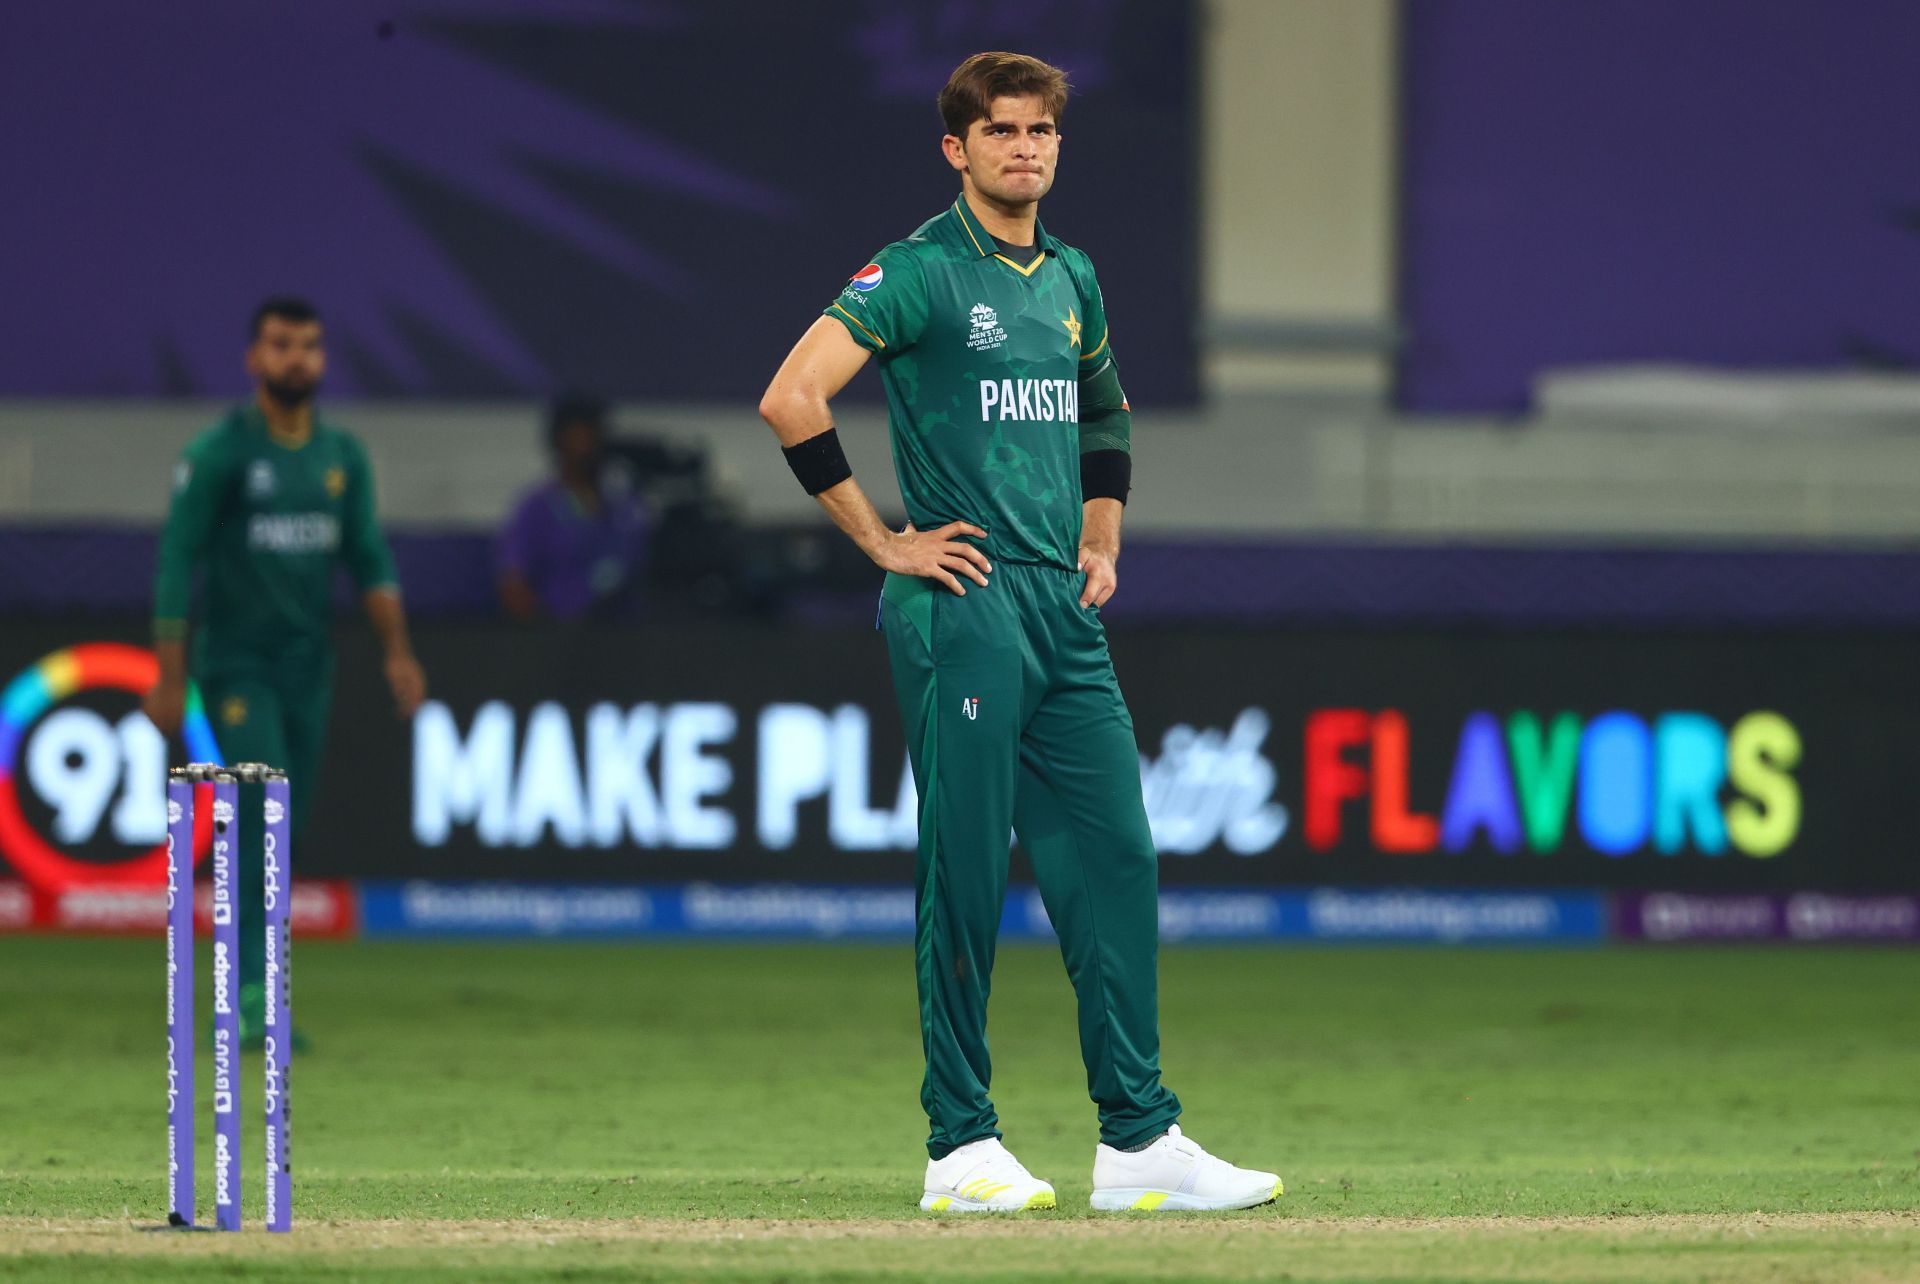 Pakistan&#039;s Shaheen Afridi wreaked havoc against India to end his side&#039;s losing streak over.